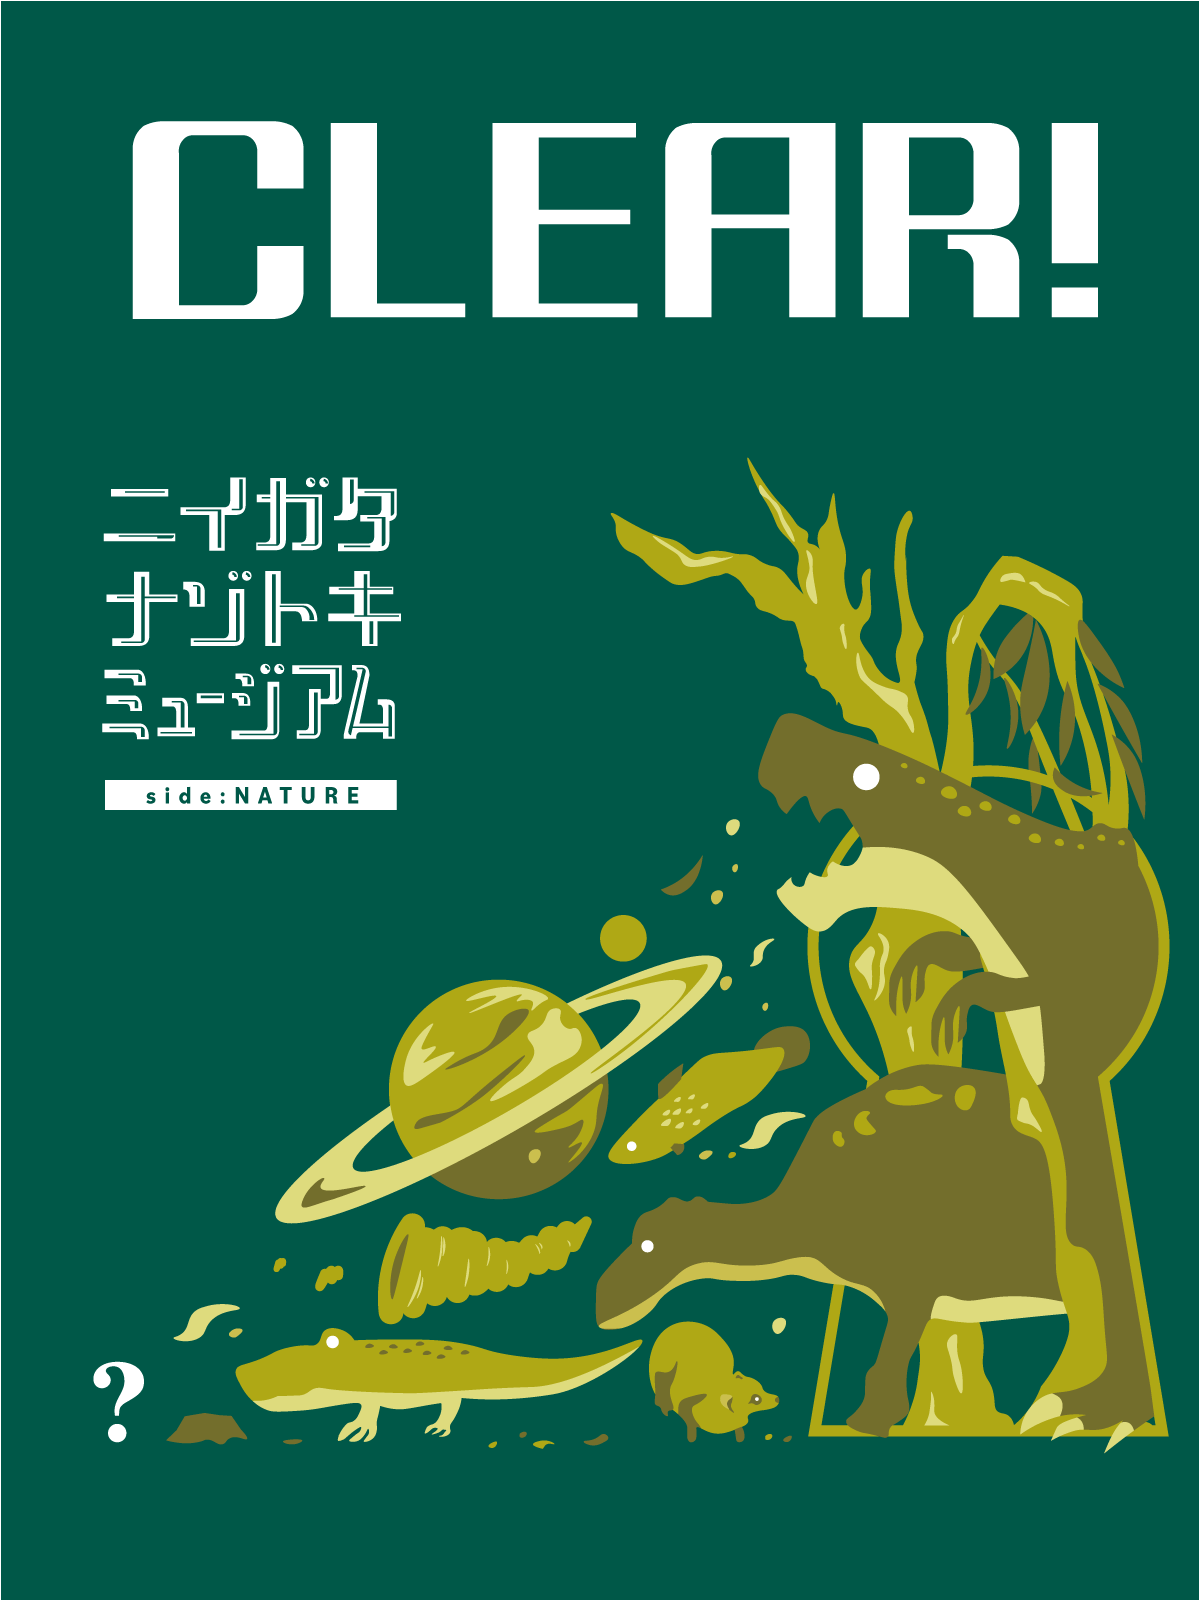 CLEAR!